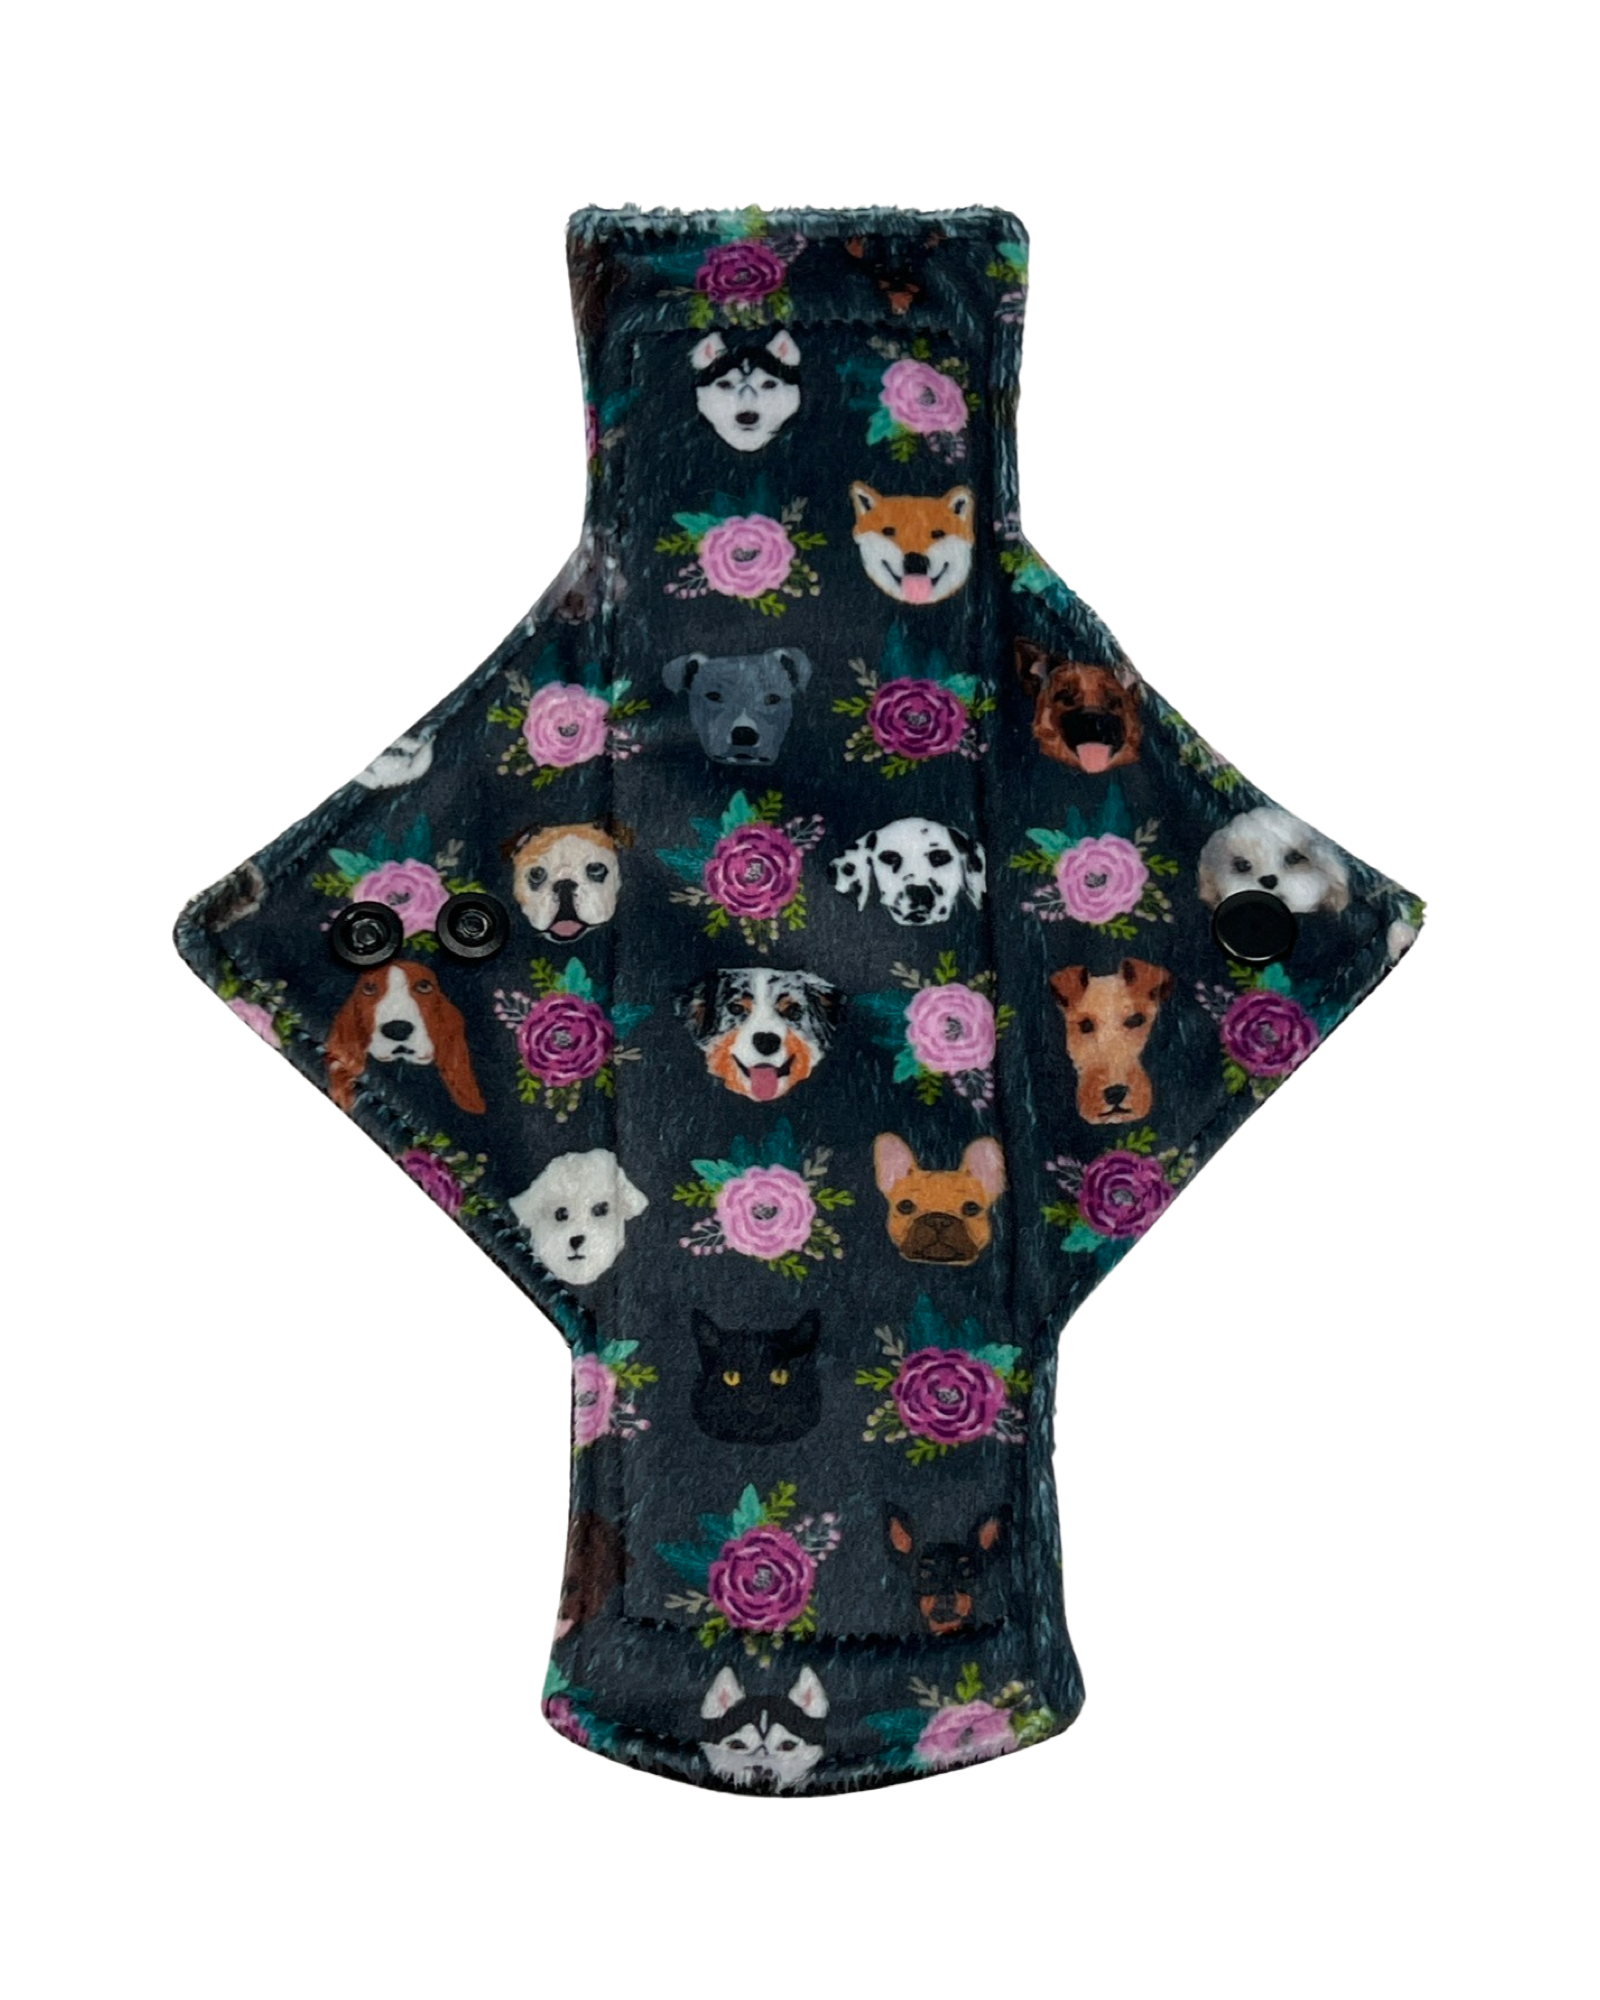 Stash Dash Event 2023 - Backed with Softshell Fleece Puppy Faces Limited Edition Minky Single Light Flow Day Pad - Tree Hugger Cloth Pads